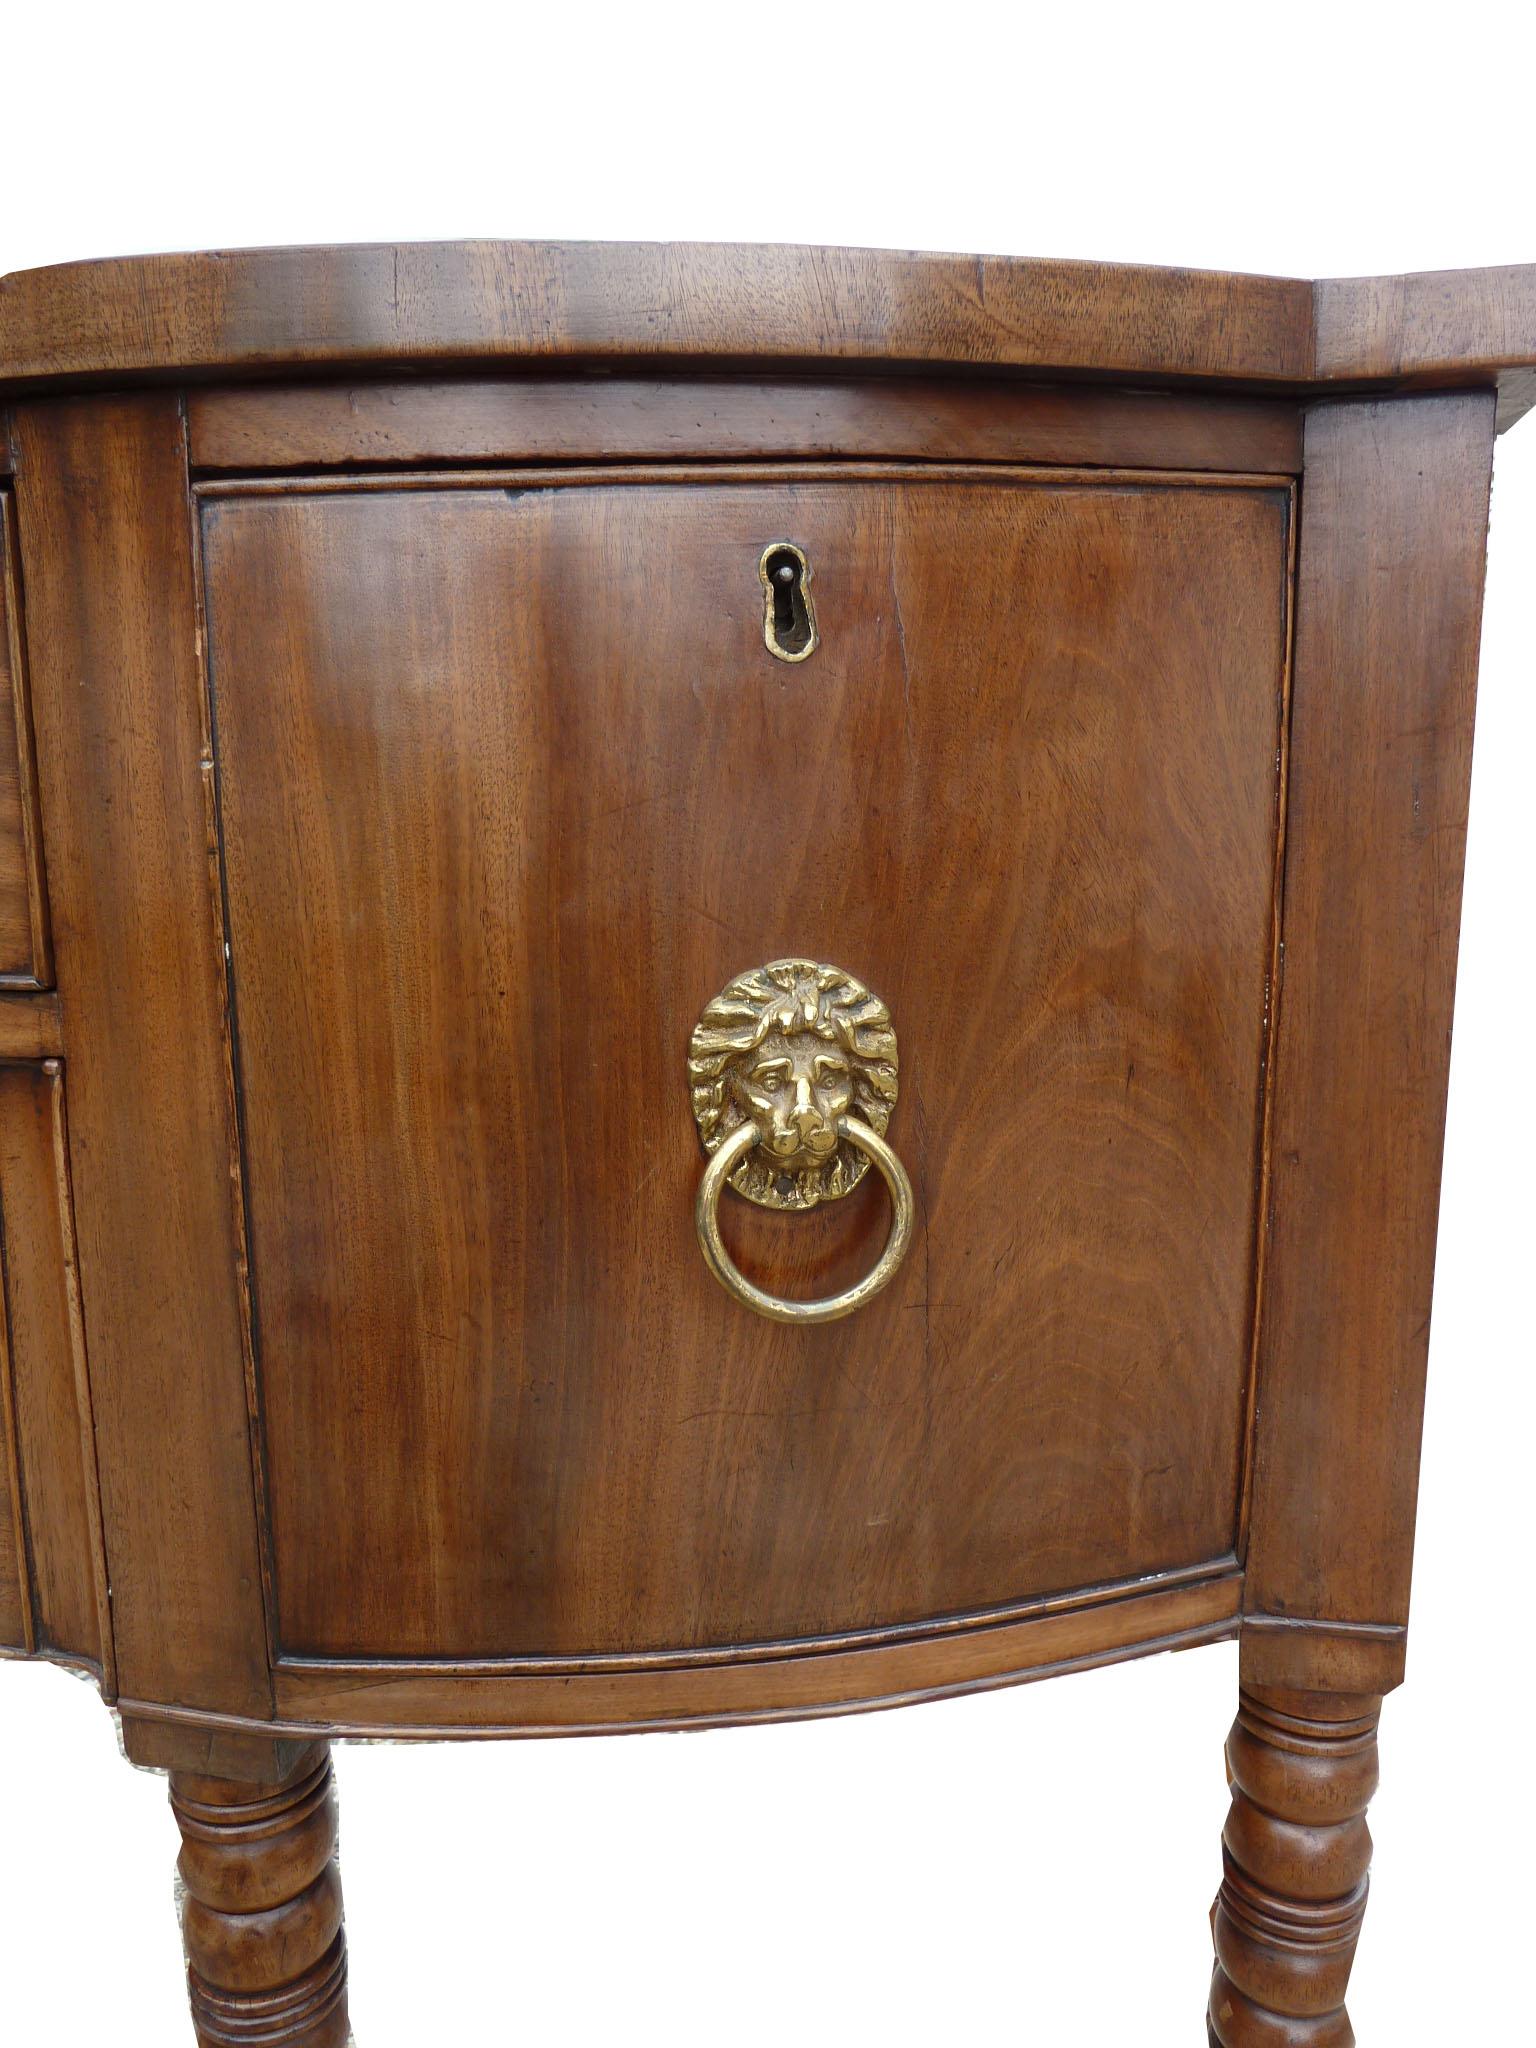 For sale is a good quality George III mahogany sideboard of small proportions. The sideboard has four drawers, each with original brass handles. The sideboard stands on 6 elegant turned legs. This piece is in a good untouched condition though there